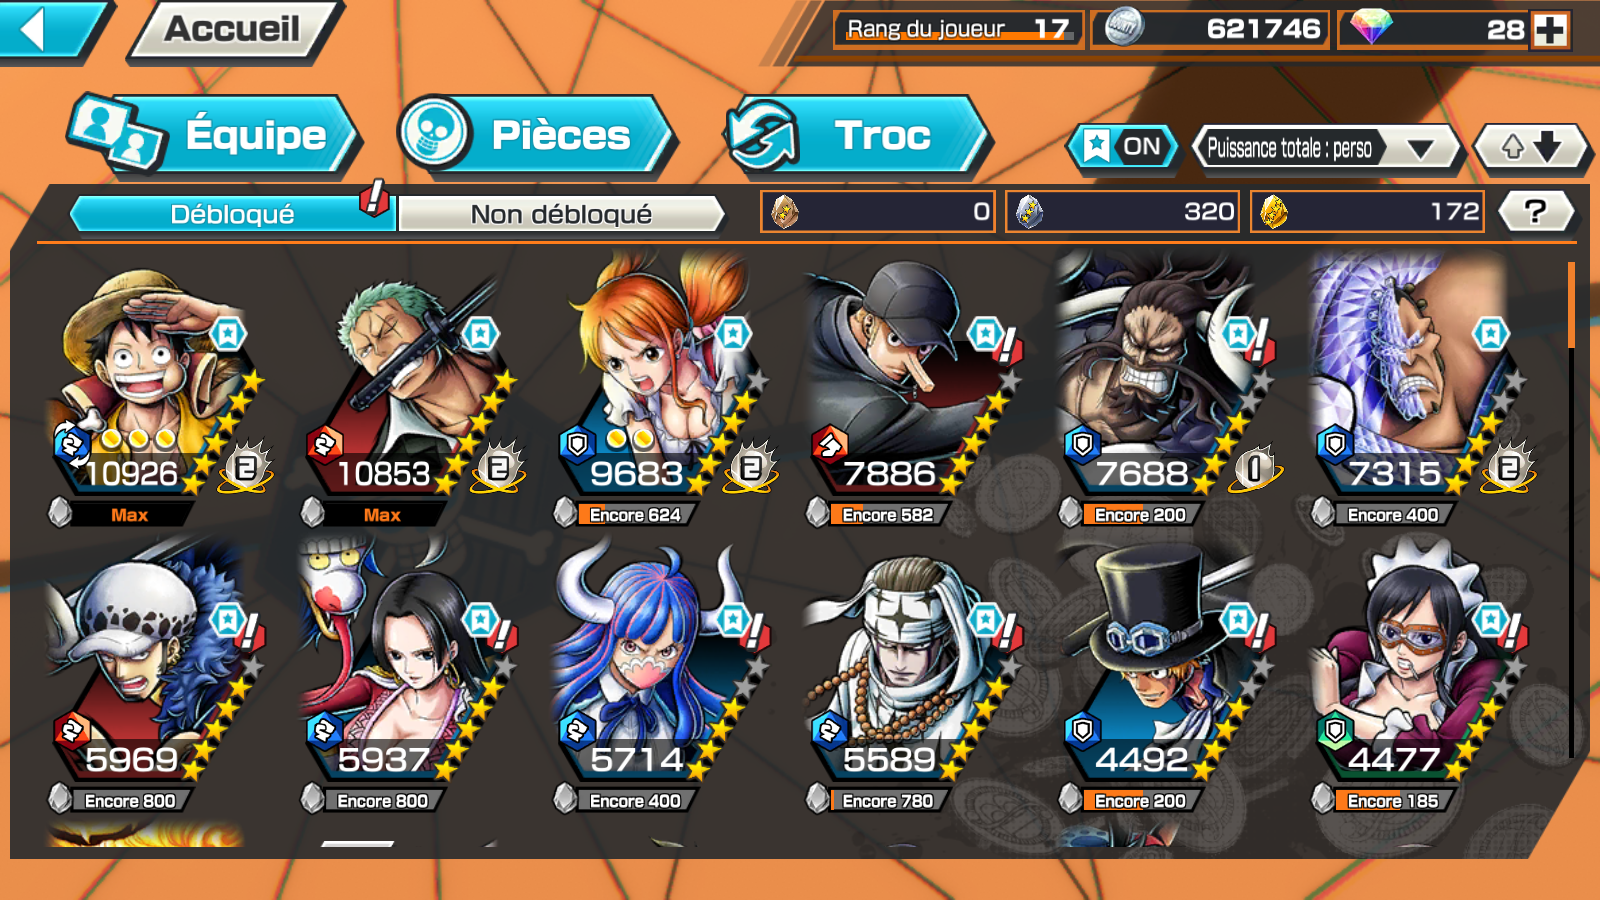 SOLD - Selling❗ One Piece Bounty Rush Account 2 Extreme (Roger Max and  Oden Max) - EpicNPC